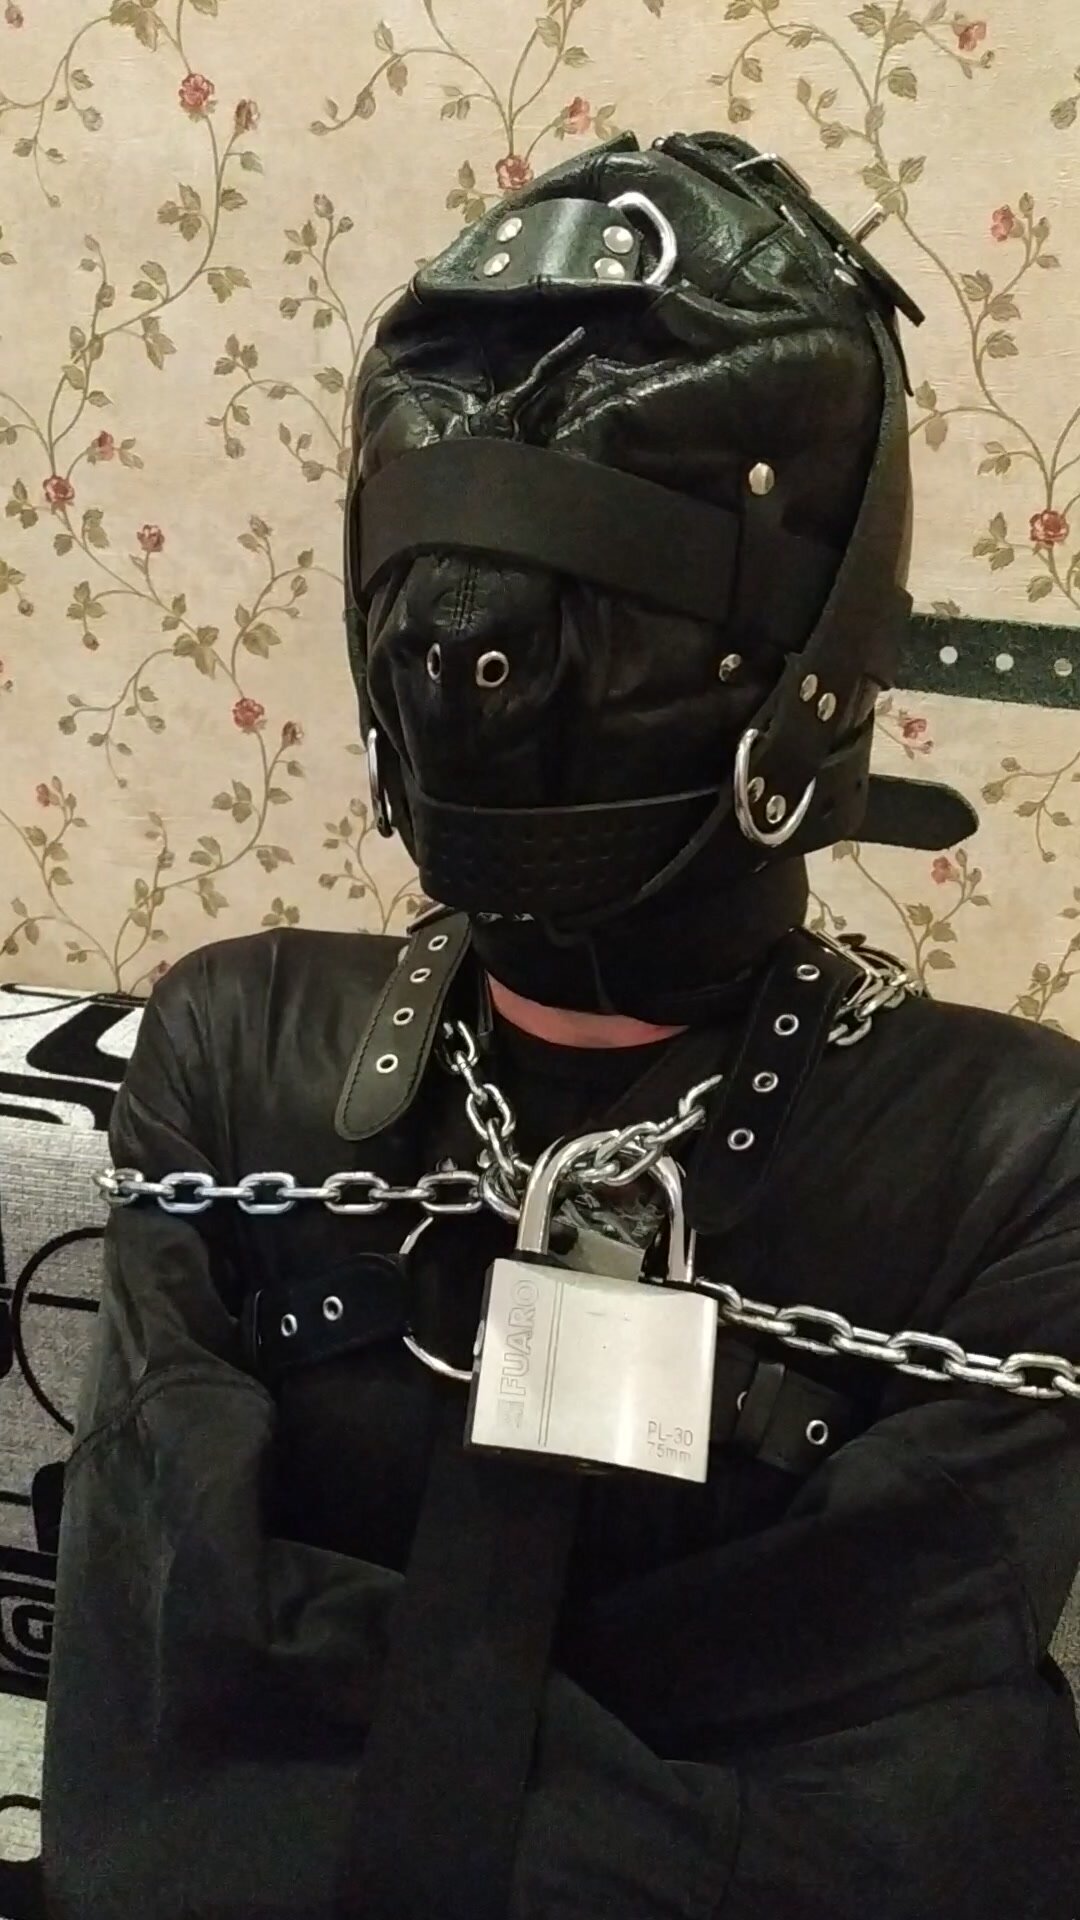 Testing the chains(1)